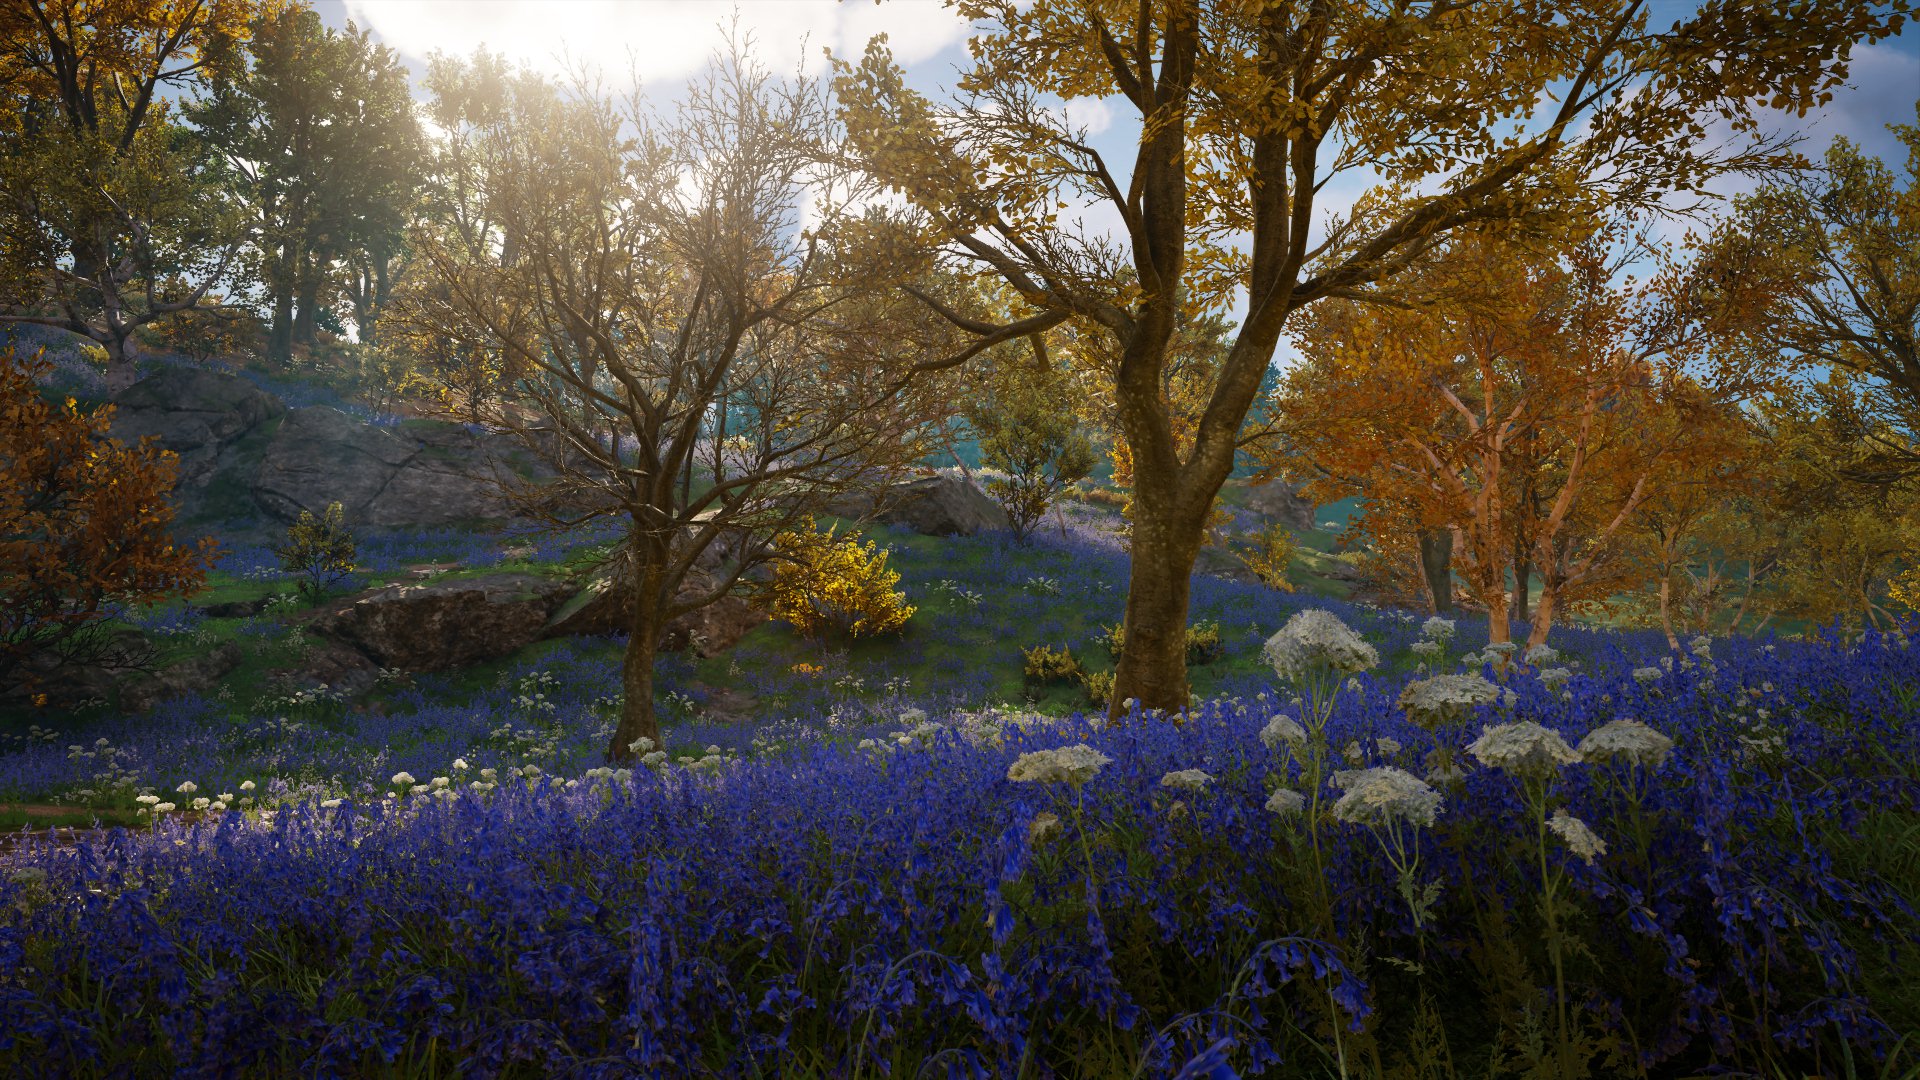 General 1920x1080 Assassin's Creed: Valhalla video games nature trees flowers Ubisoft